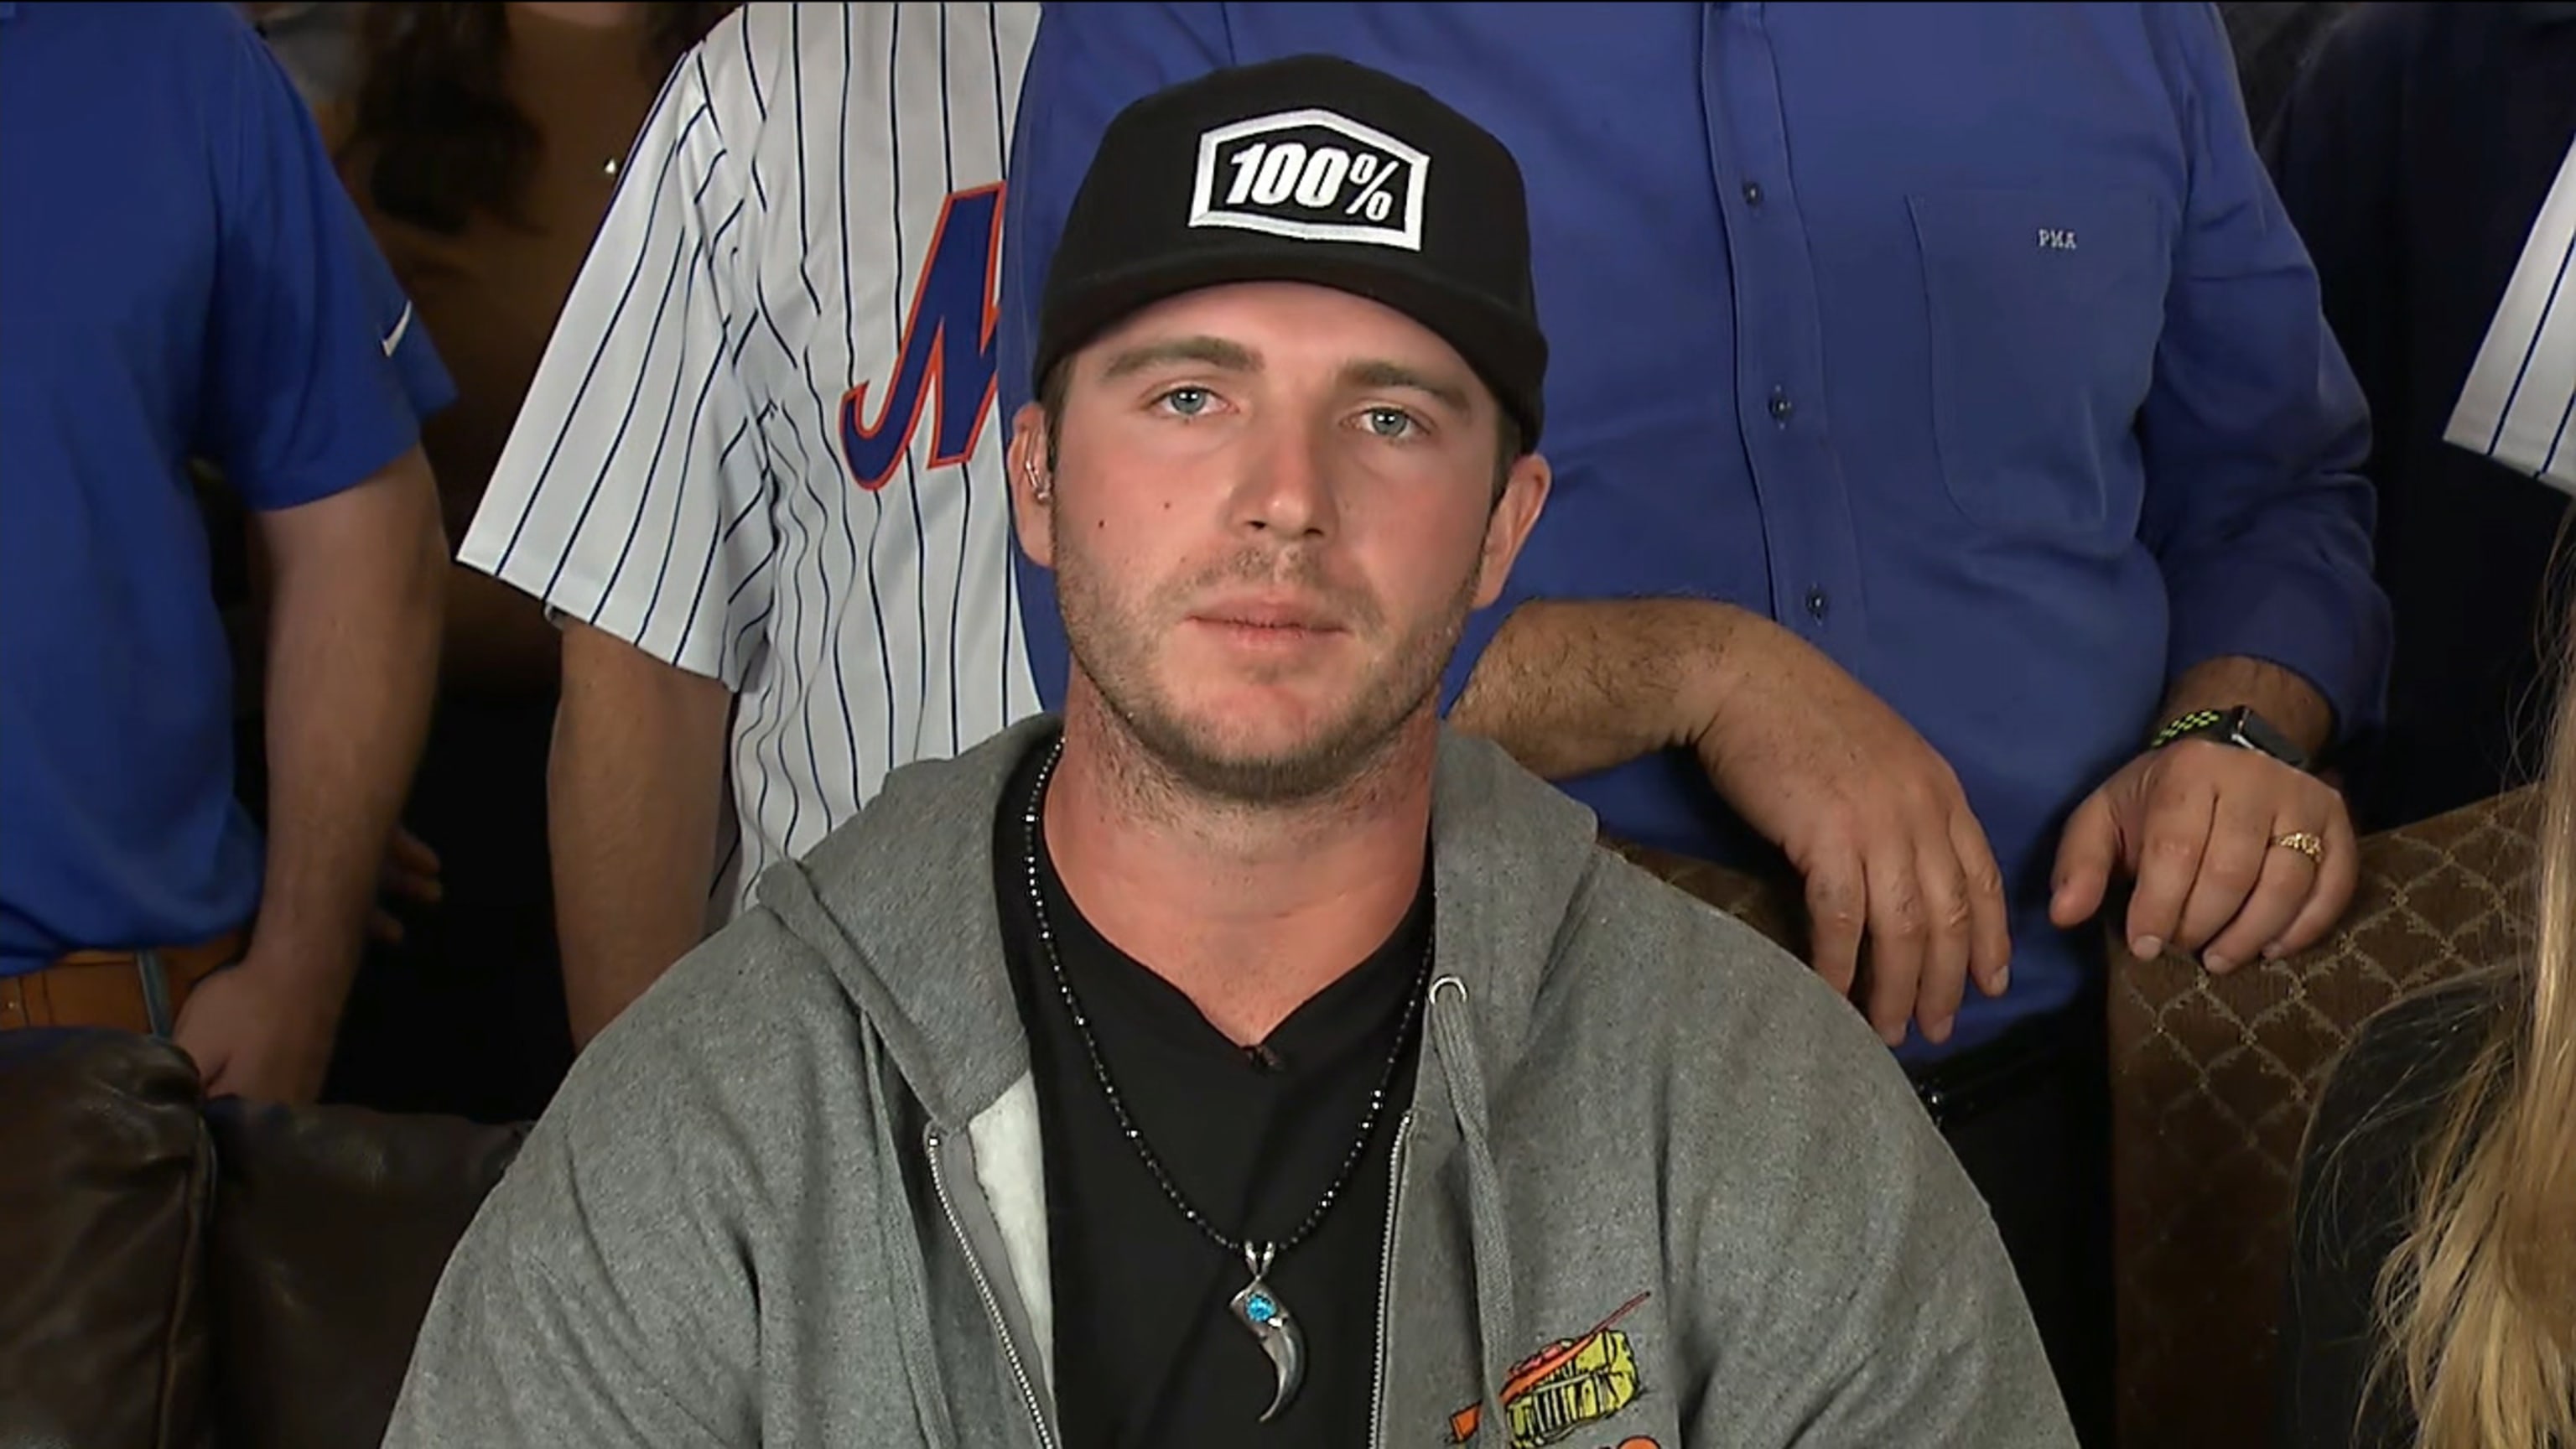 Pete Alonso wins 2019 National League Rookie of the Year Award - NBC Sports